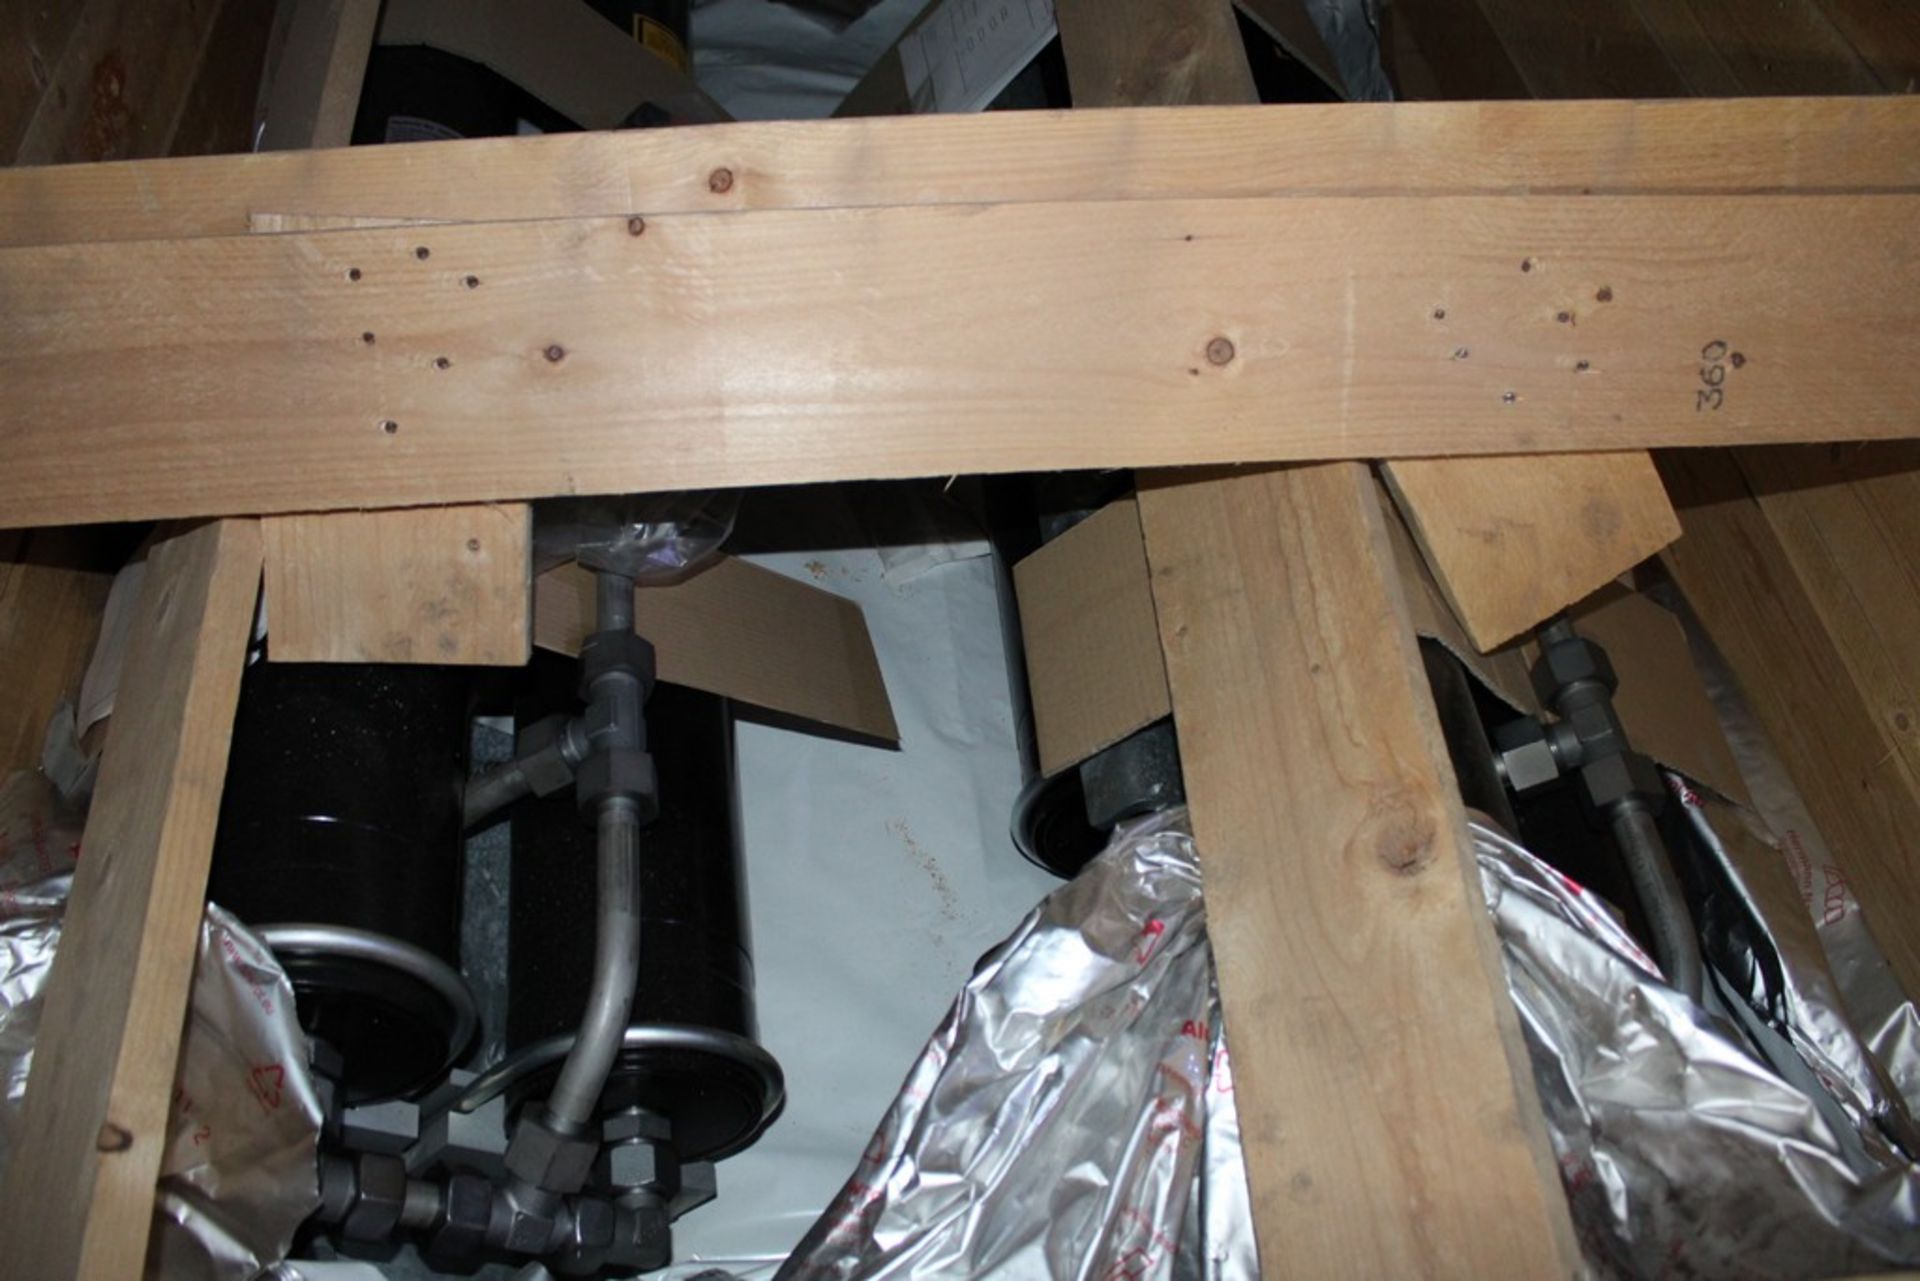 (2) HYDROLL / PMC SC 113738 0A PITCH AXIS CONTROLS / DEWIND D9.2 IN CRATE - Image 3 of 6